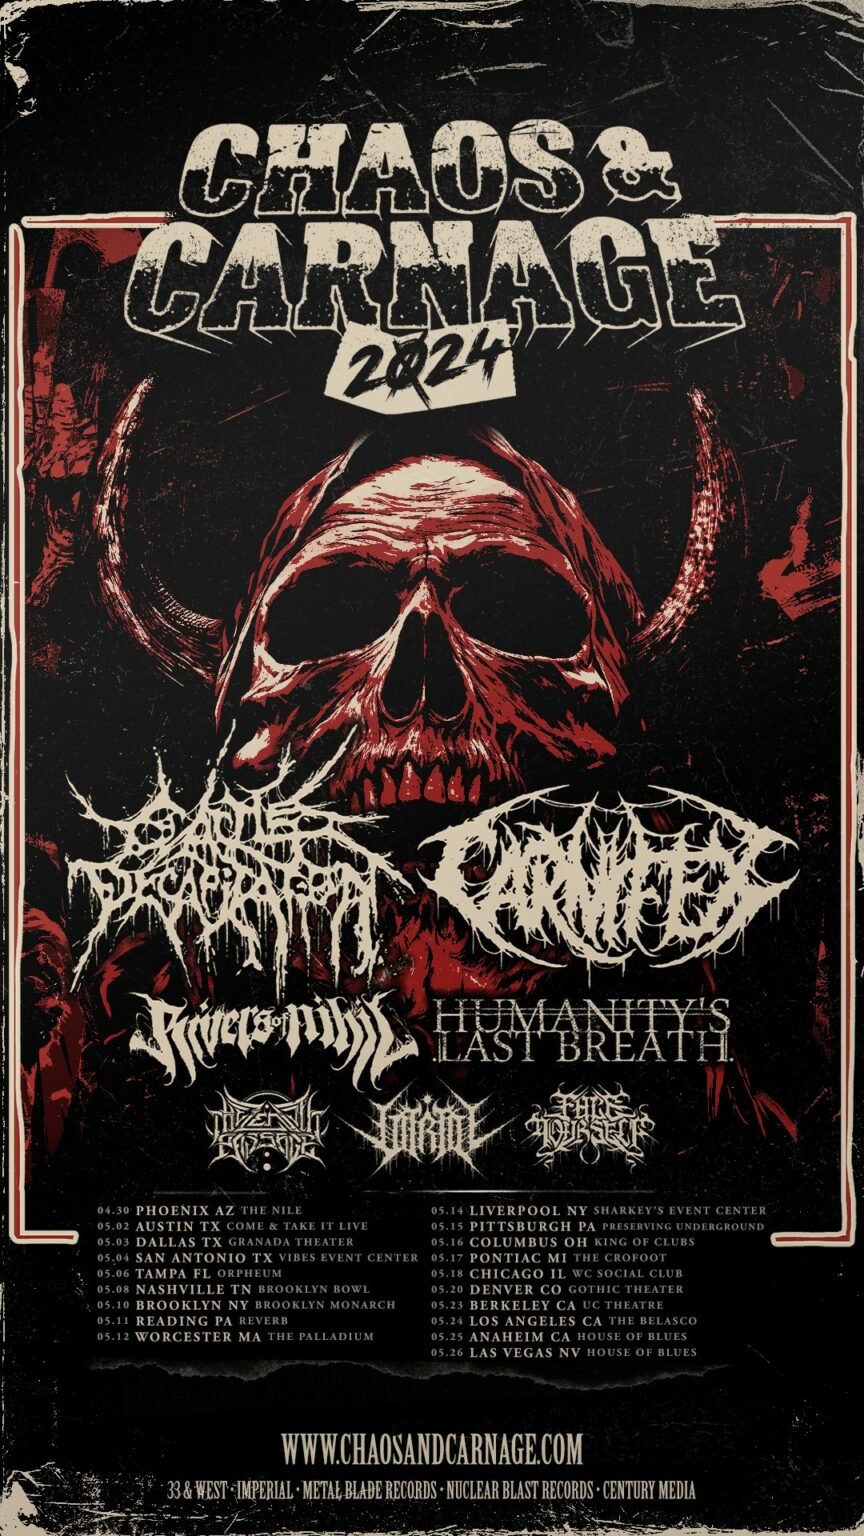 VITRIOL Confirmed for “Chaos and Carnage Tour” 2024